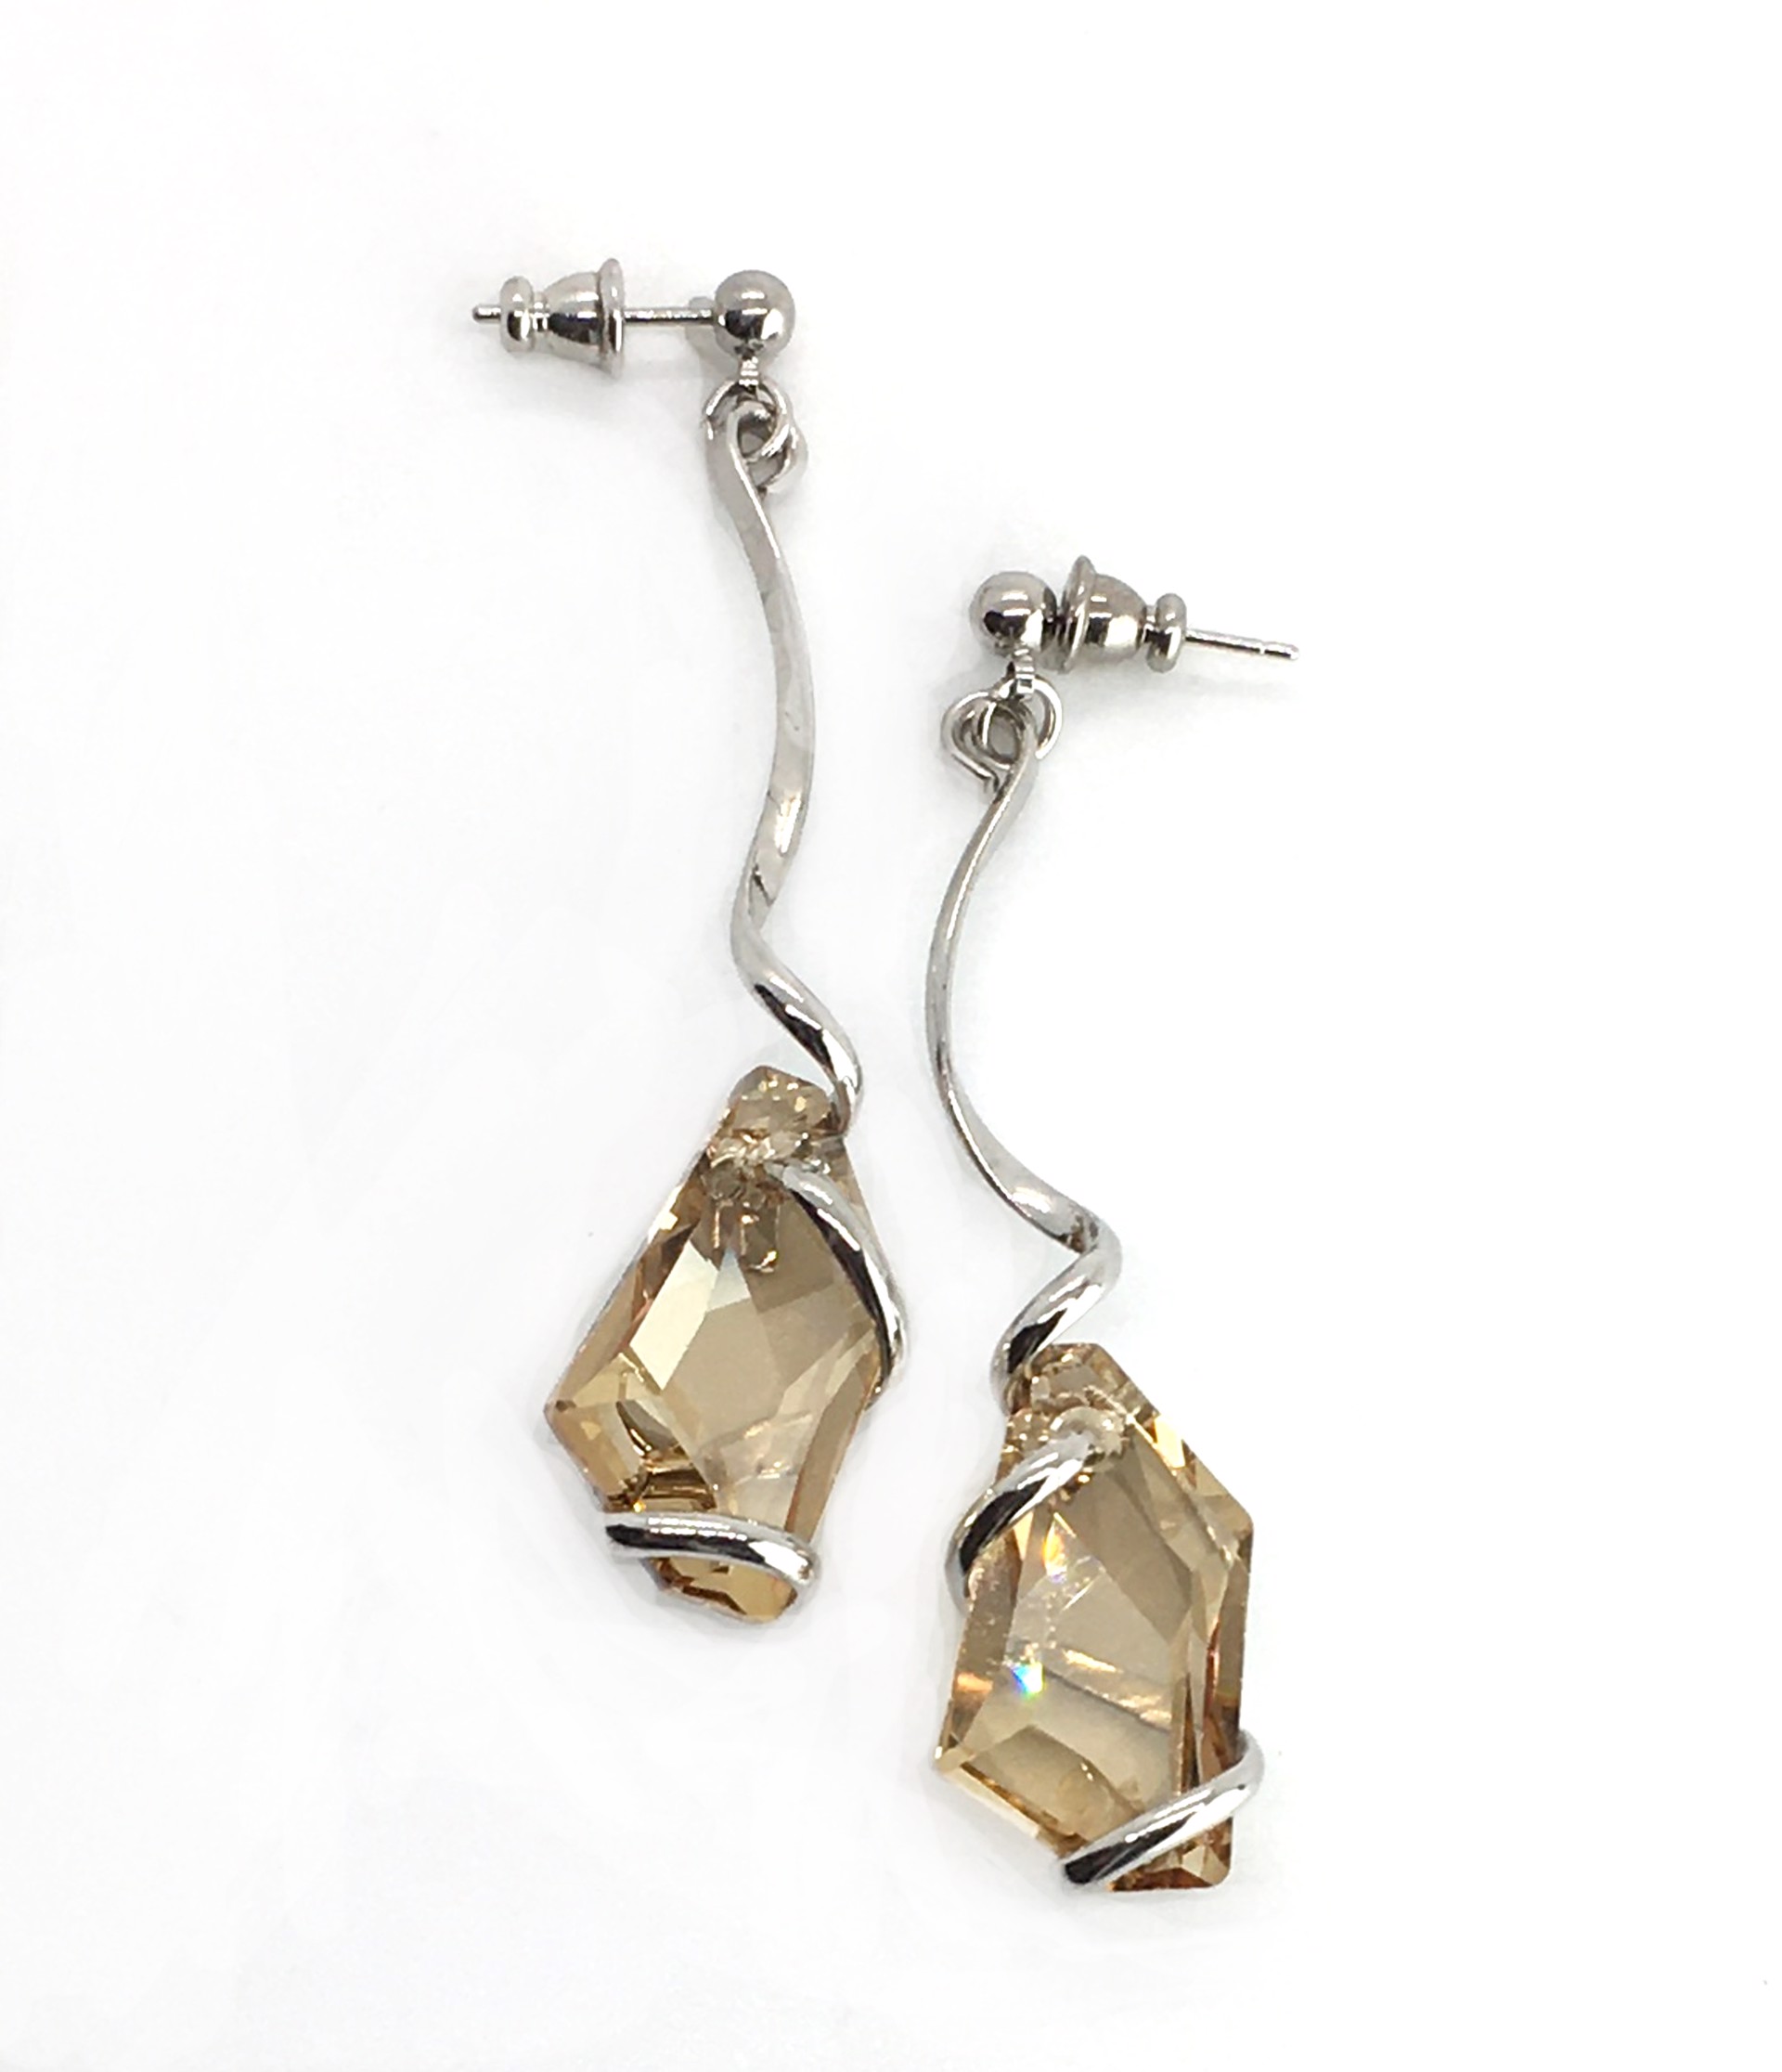 D'Arte Series Earrings ~ Golden Shadow Austrian Swarovski Crystal ~  Mixed Metals Triple Coated with Rhodium ~ Handmade Setting by Monique Touber